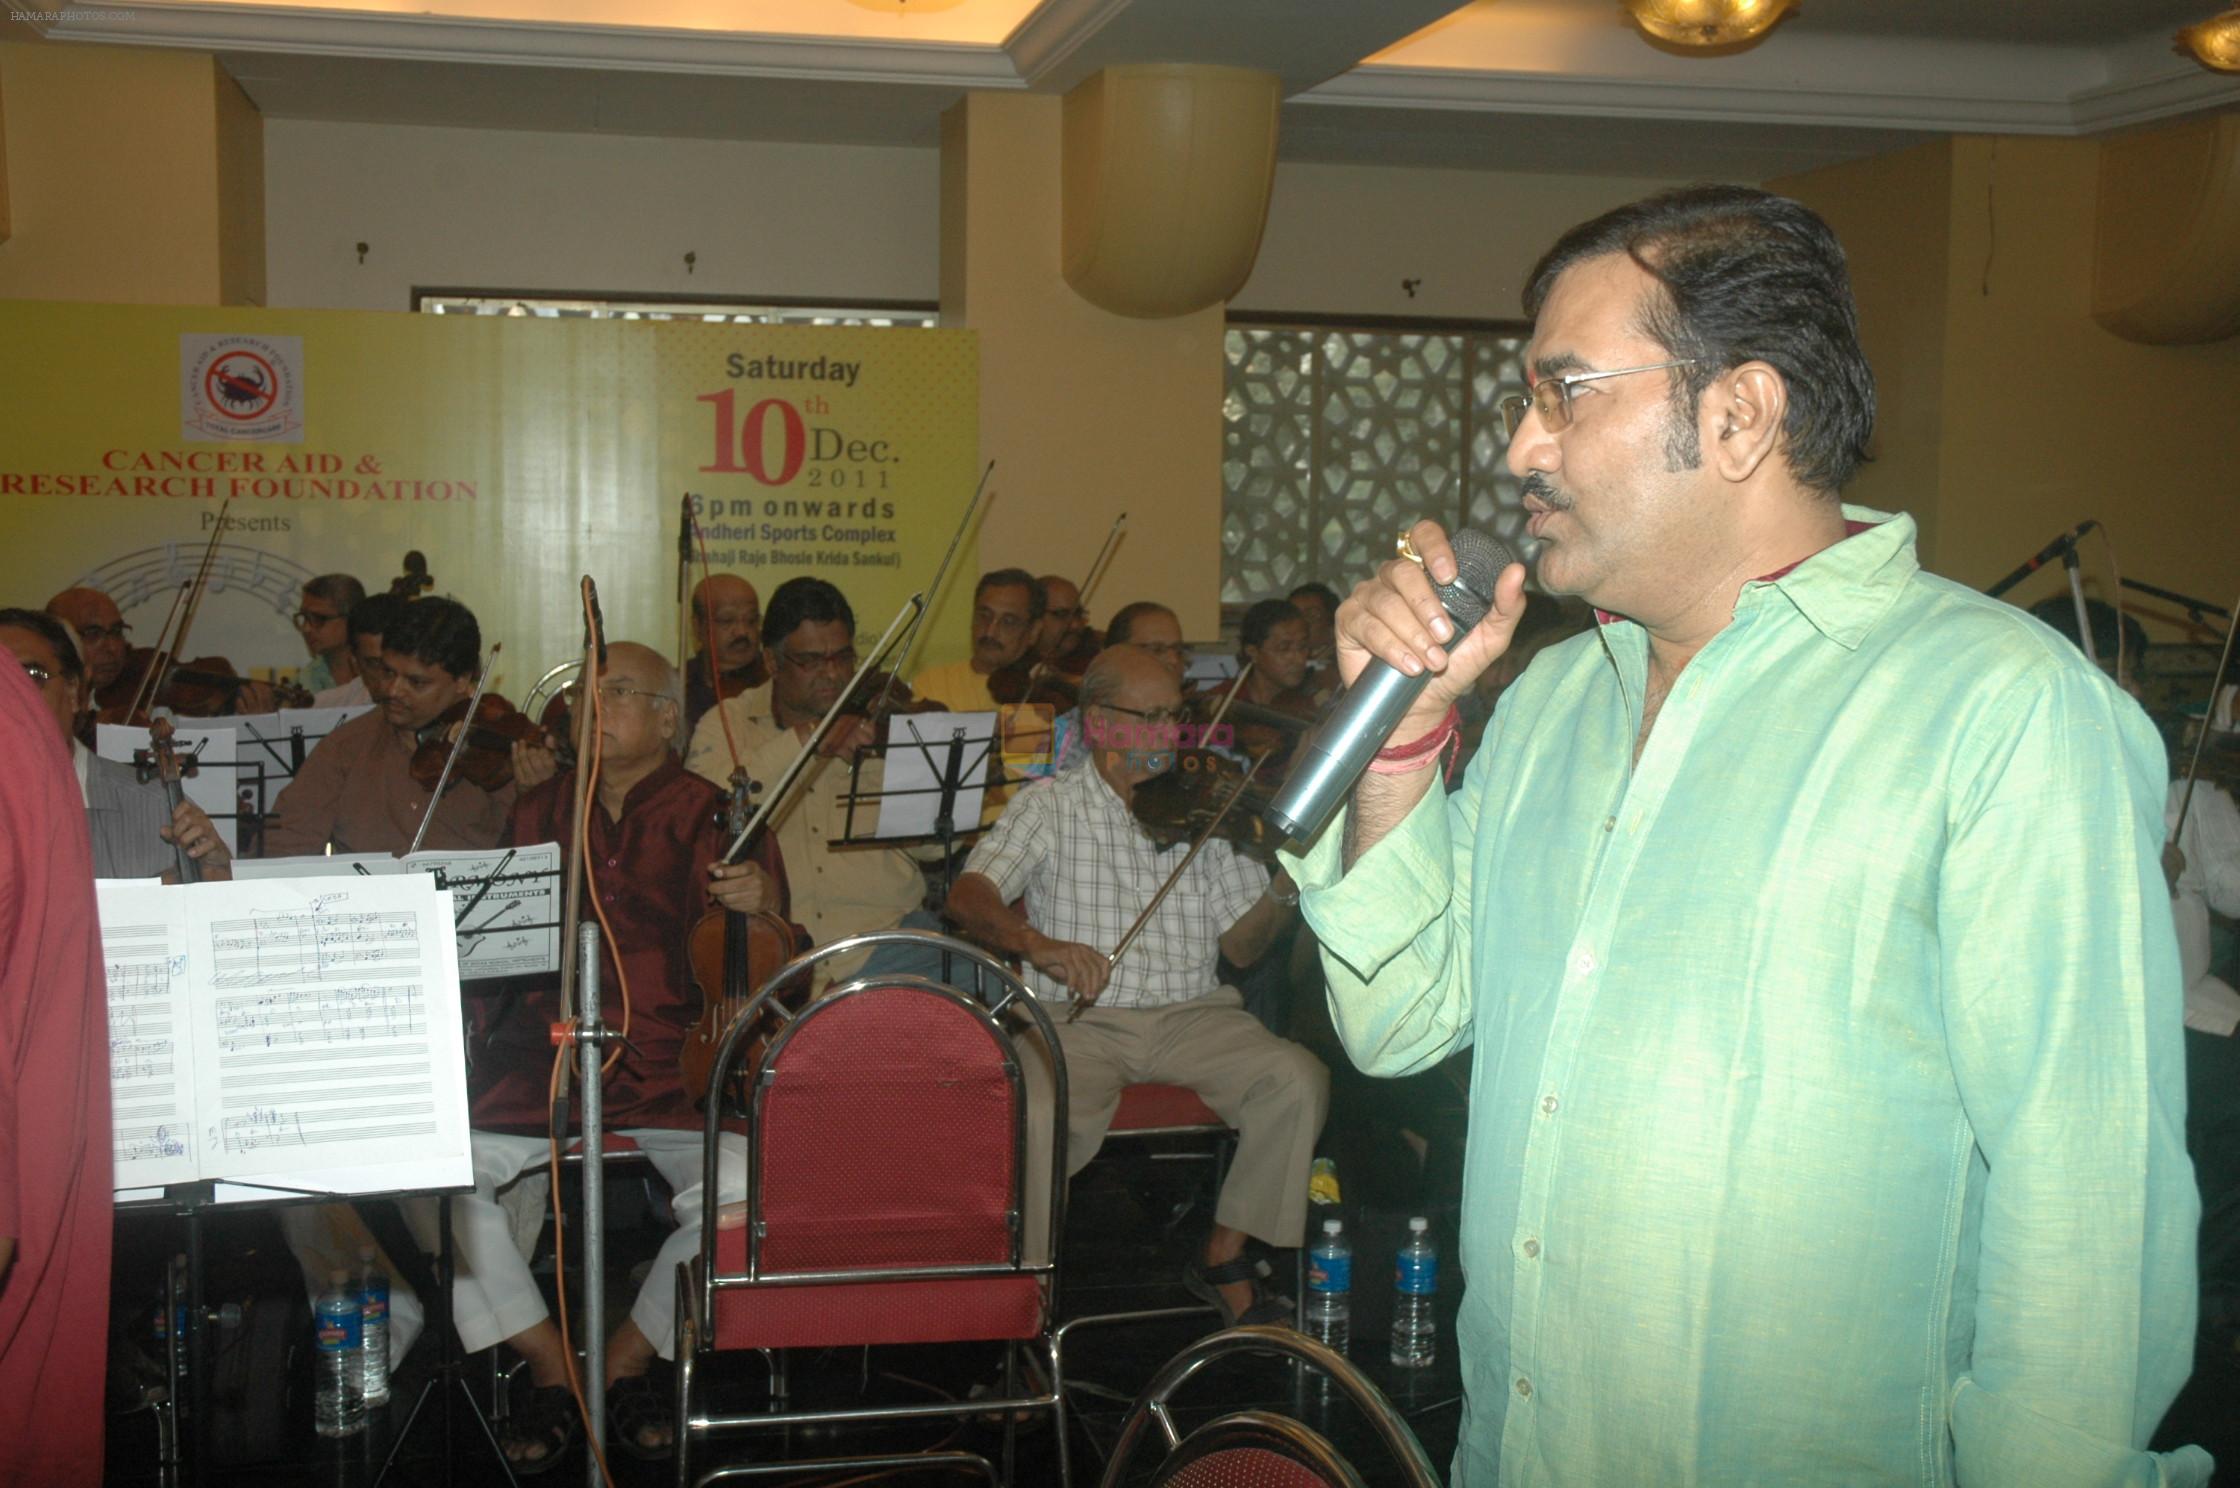 Sudesh Bhosle at the rehearsals for the Cancer Aid & Research Foundation's Music Heals 2011 with 100 live musicians under the Music Batonship of Jayanti Gosher & Kishore Sharma on 9th Nov 2011